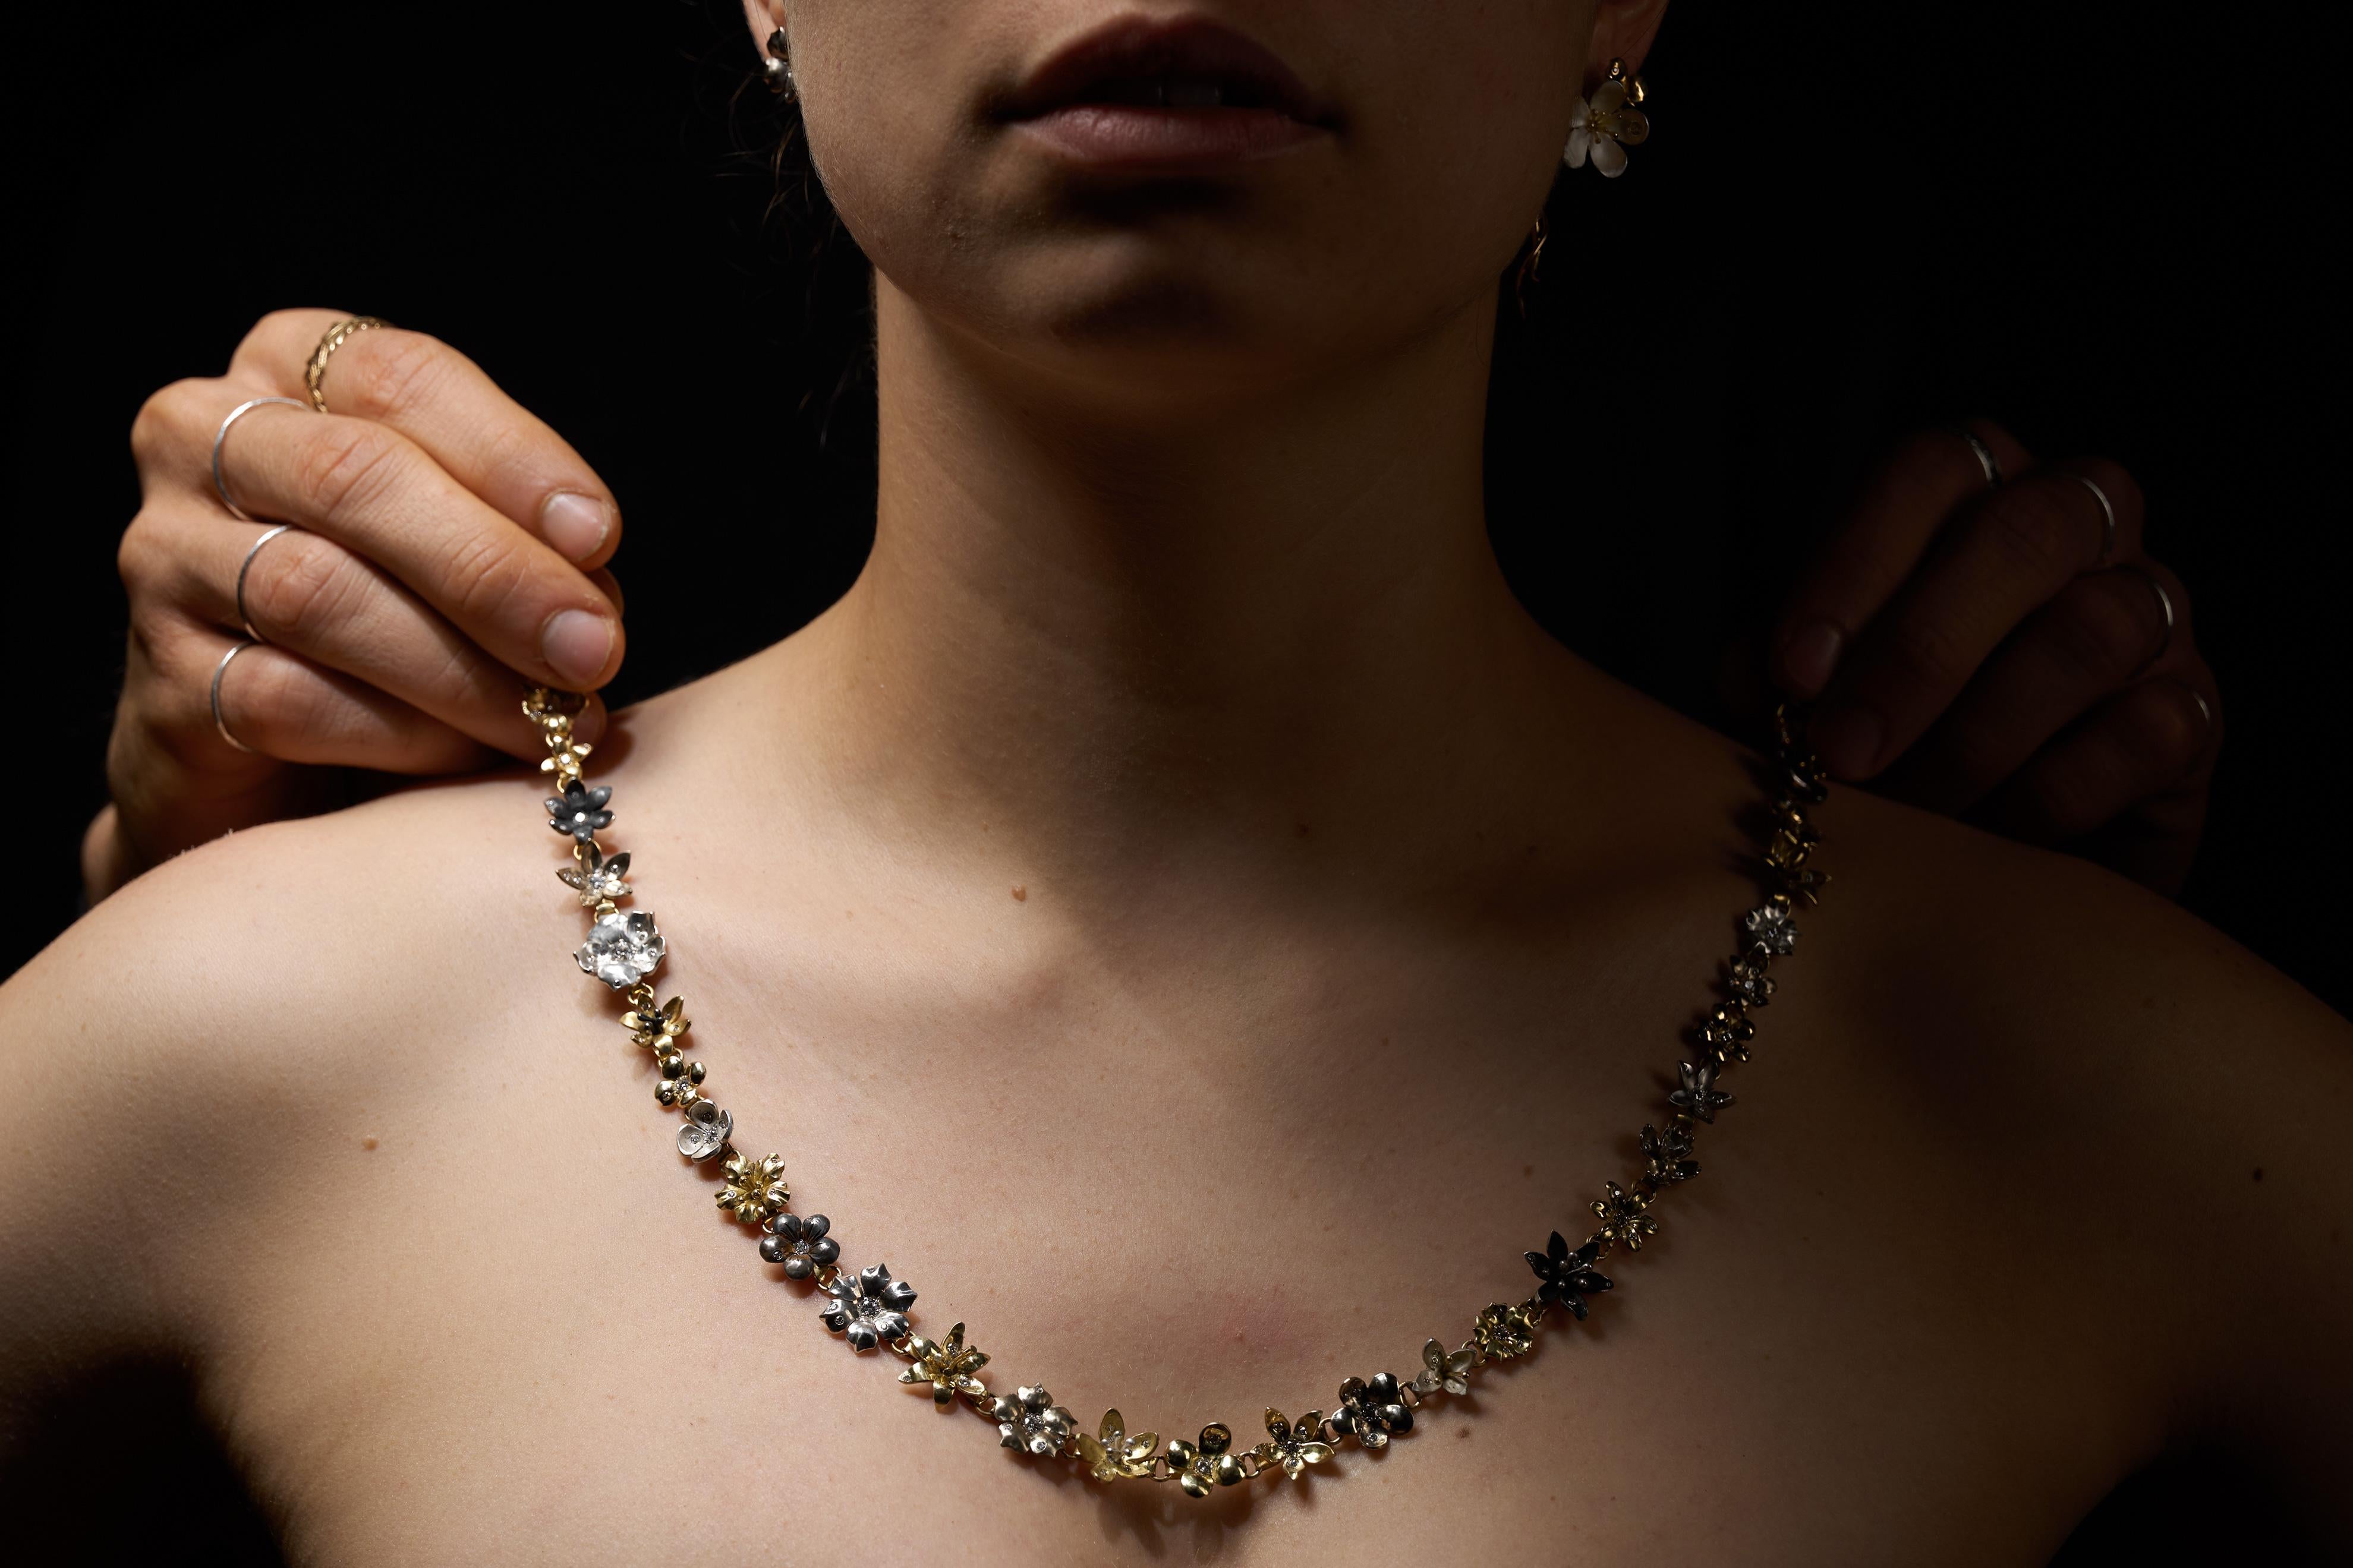 Flower necklace completely handmade in Italy with Canadamark diamonds, Fairmined silver, and different hues of 18K Fairmined gold.

The necklace, composed of thirty-three individual flowers is made to sit on the collarbone and can be customised for